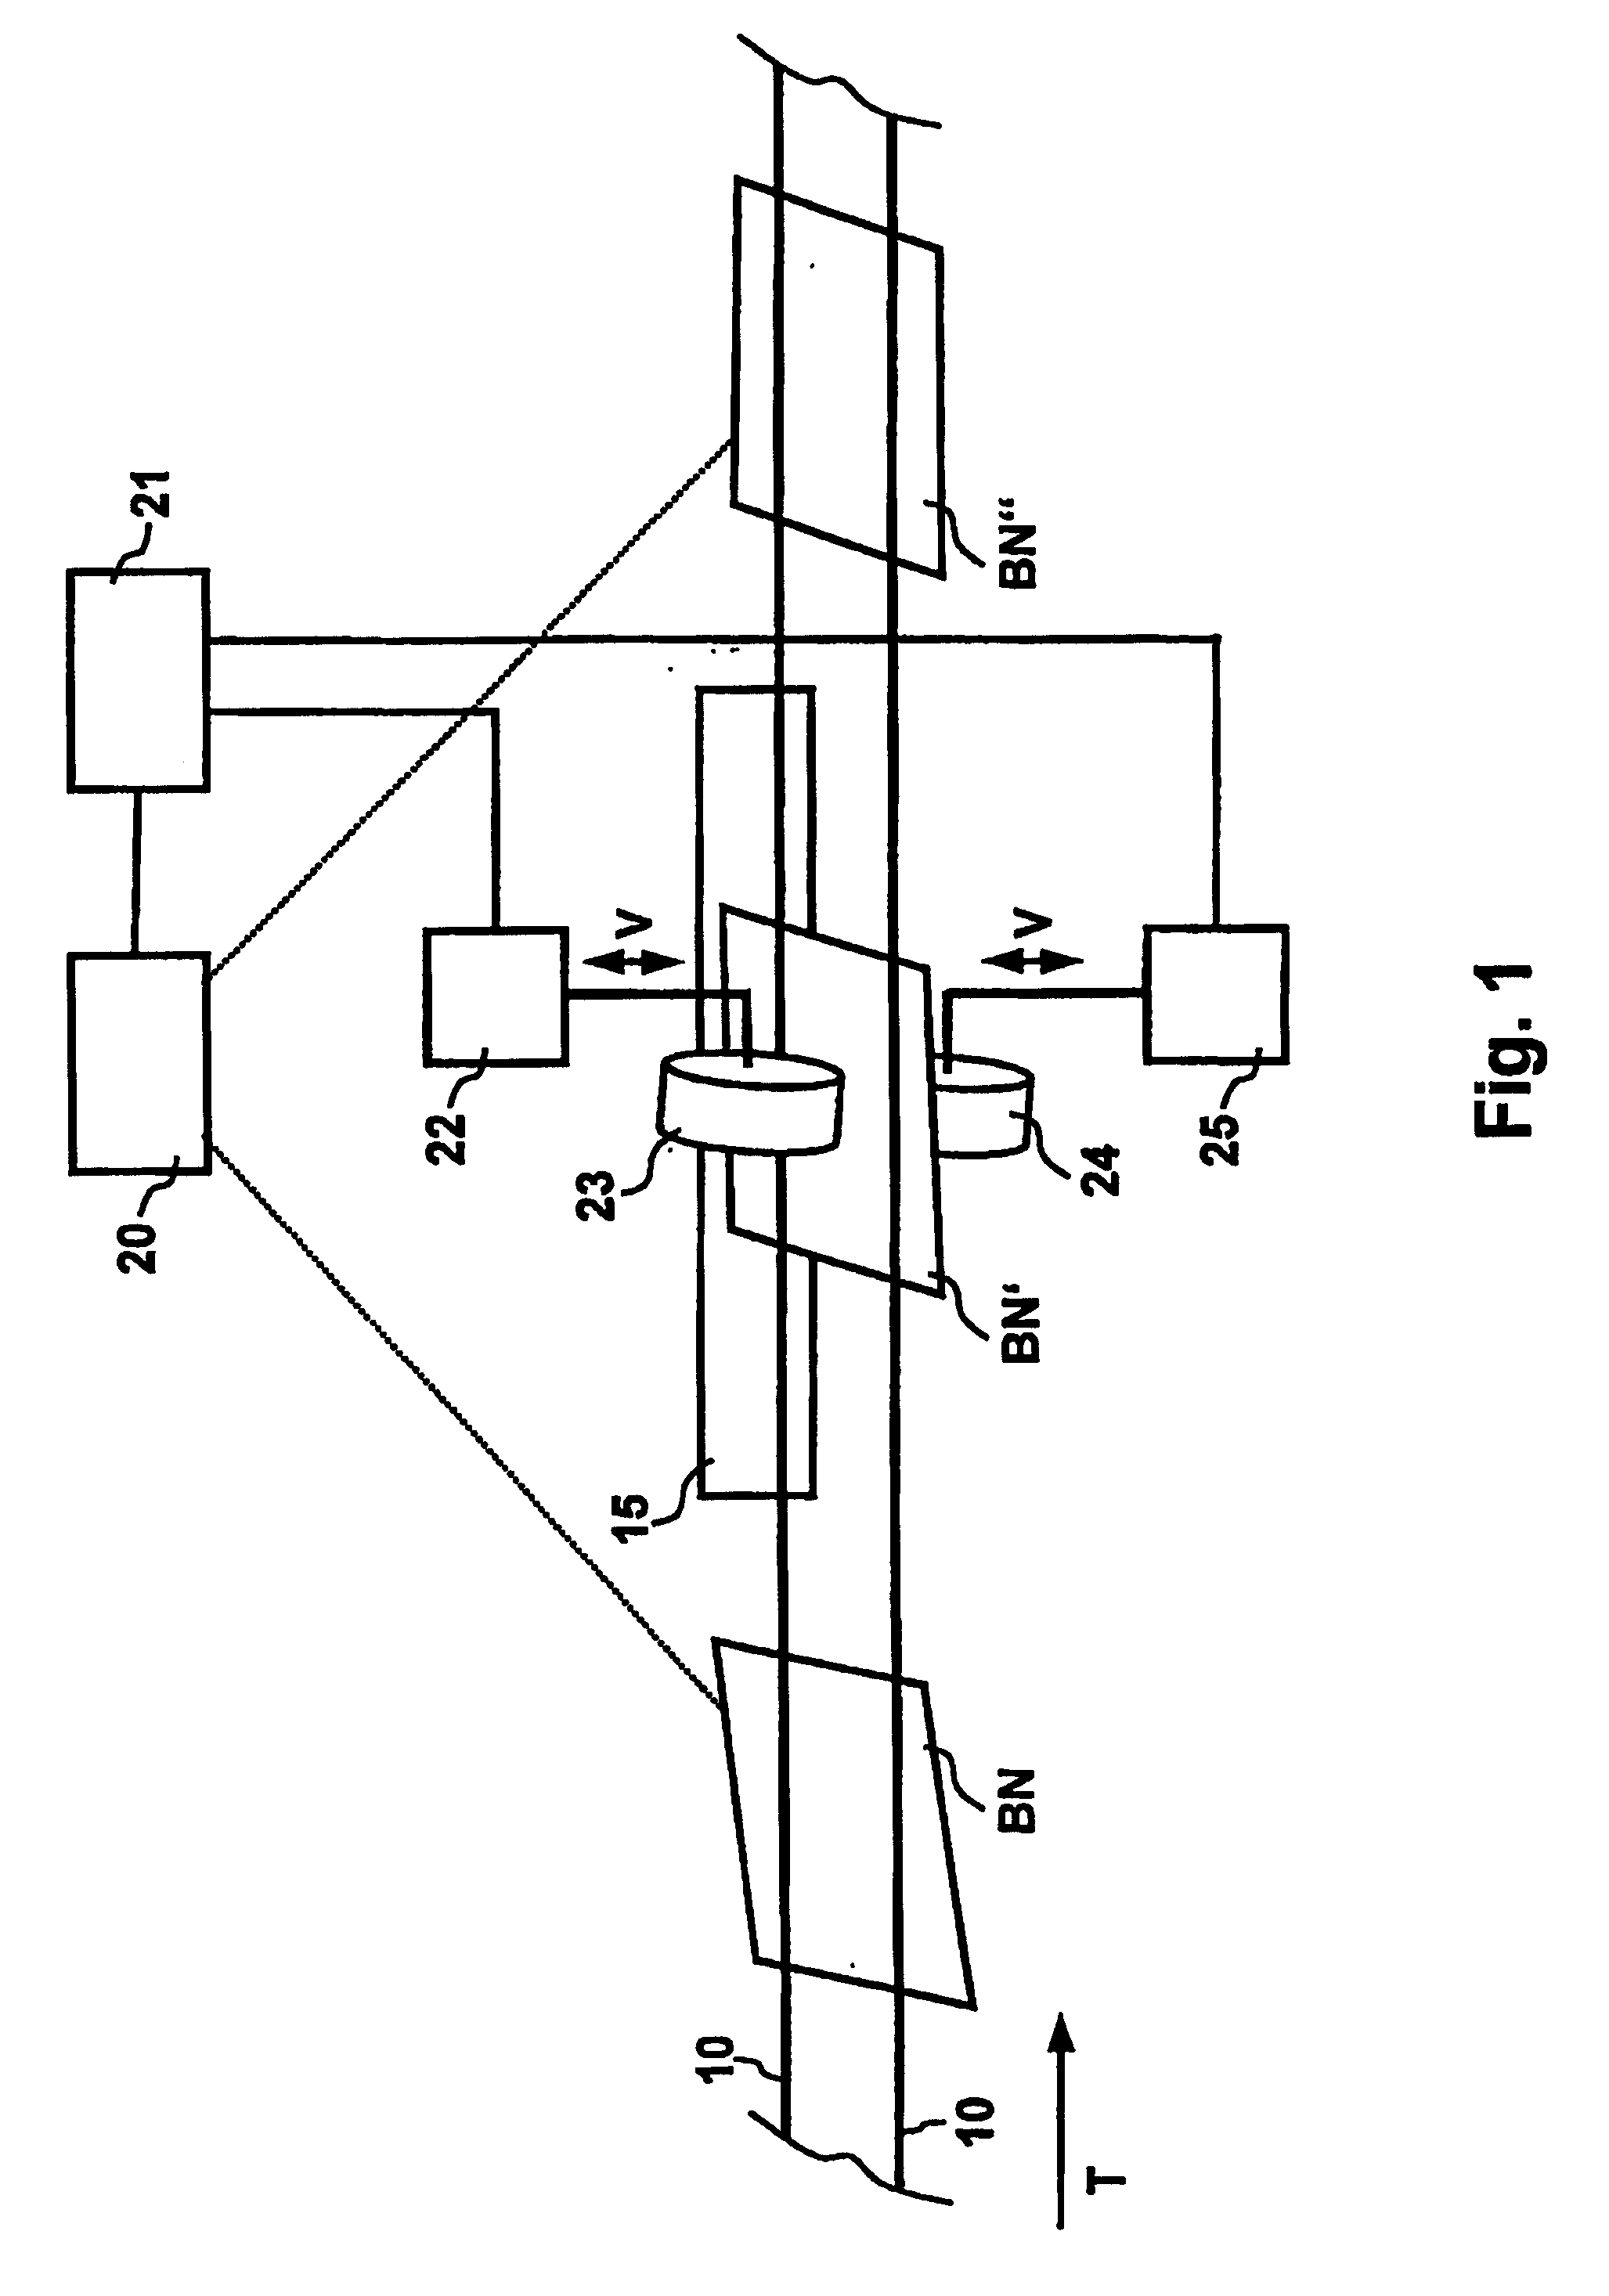 Device and method for aligning bank notes